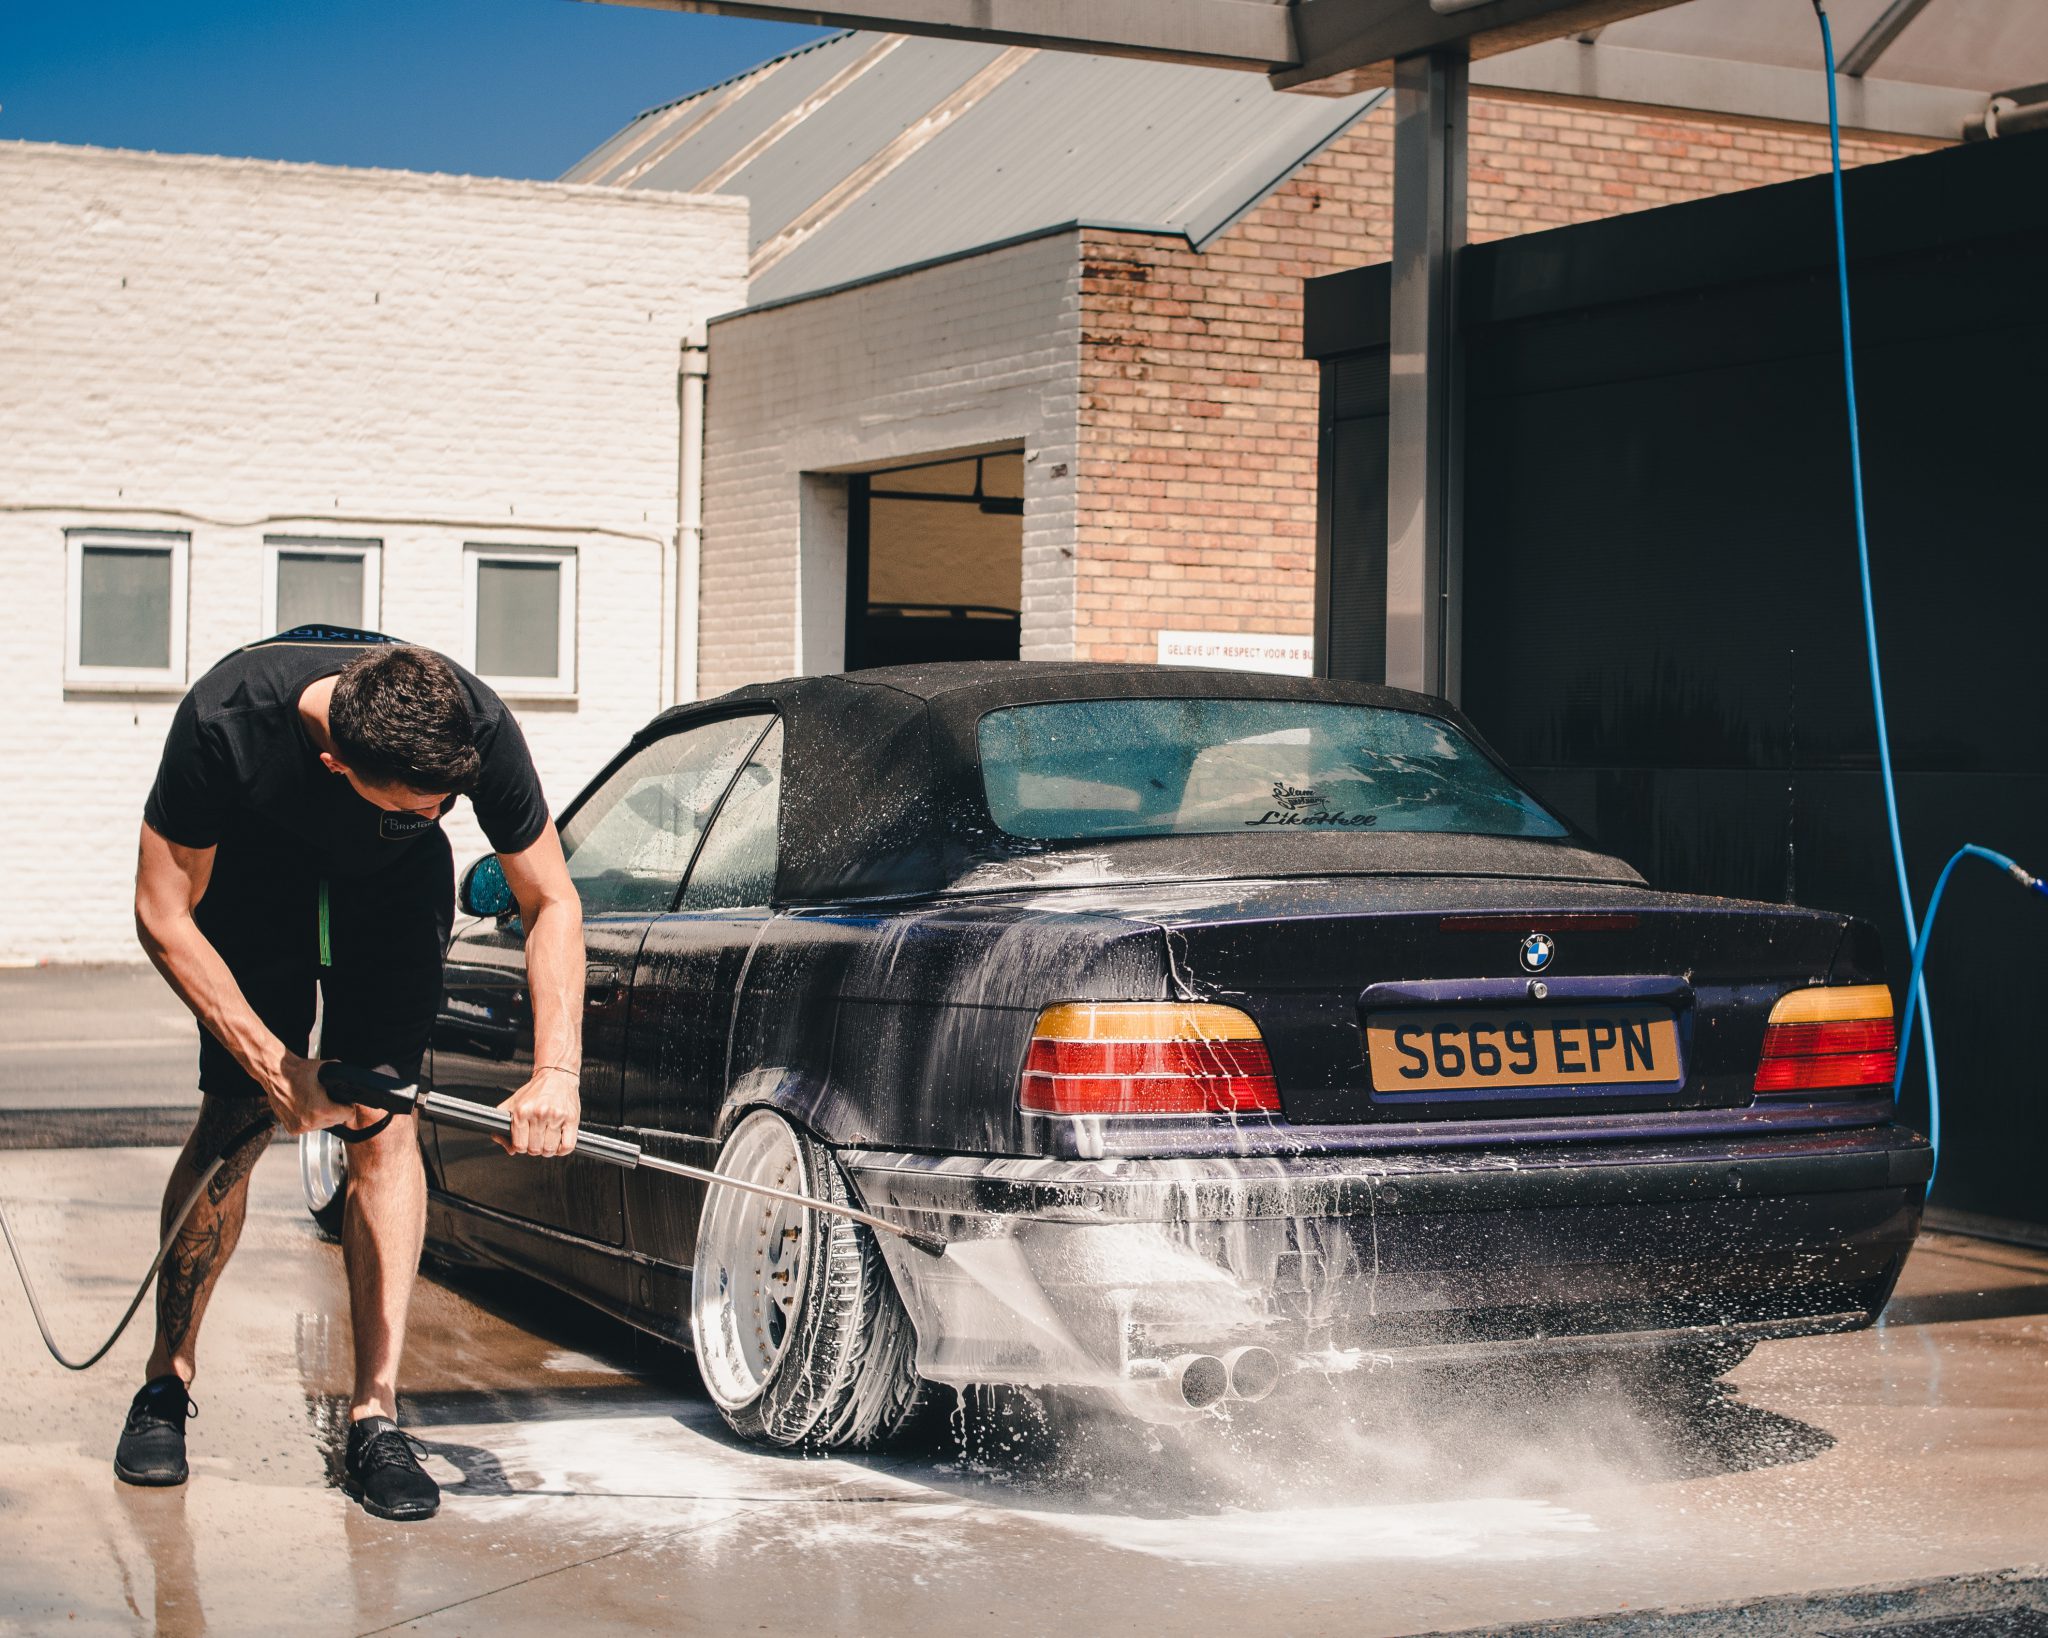 Tips for Spring Cleaning Your Car